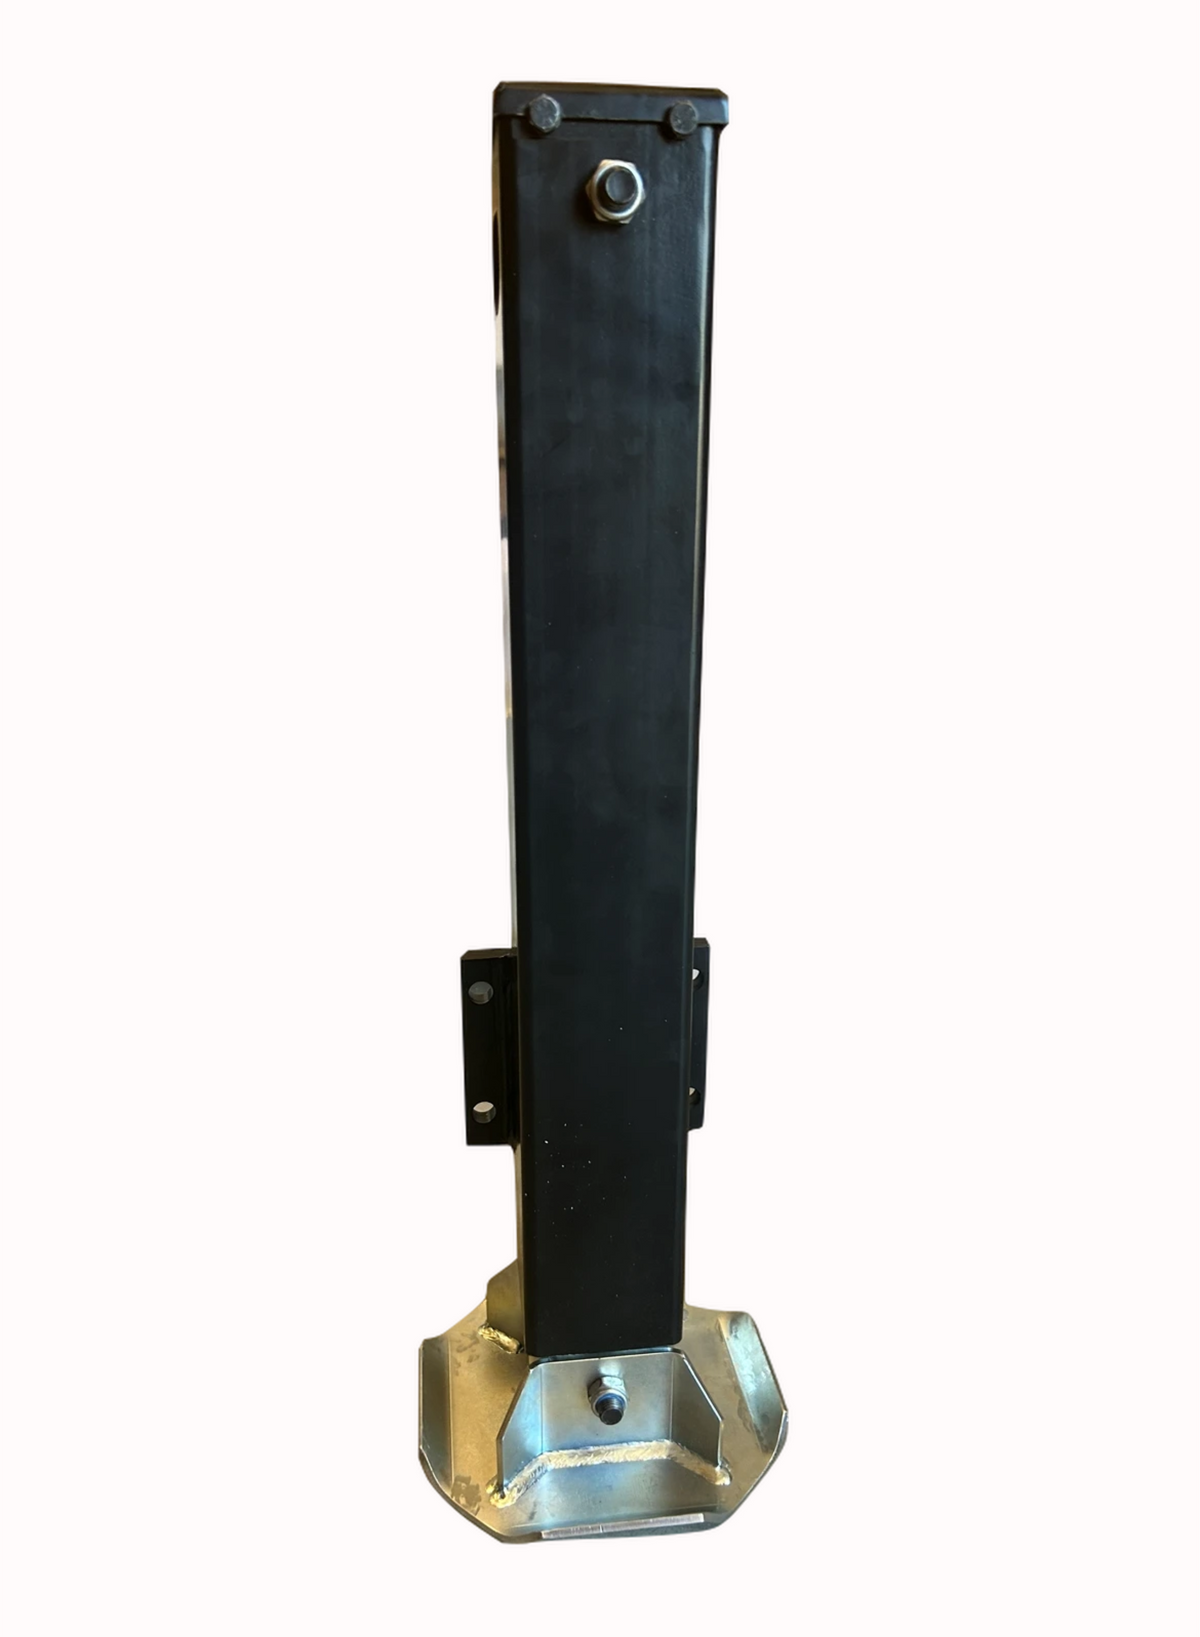 Alt text: Double Hydraulic Trailer Jack Add-On Kit featuring a black metal pole with a bolt, sturdy design, powerful hydraulic system, dual holding valve, and zinc-plated components for towing reliability.